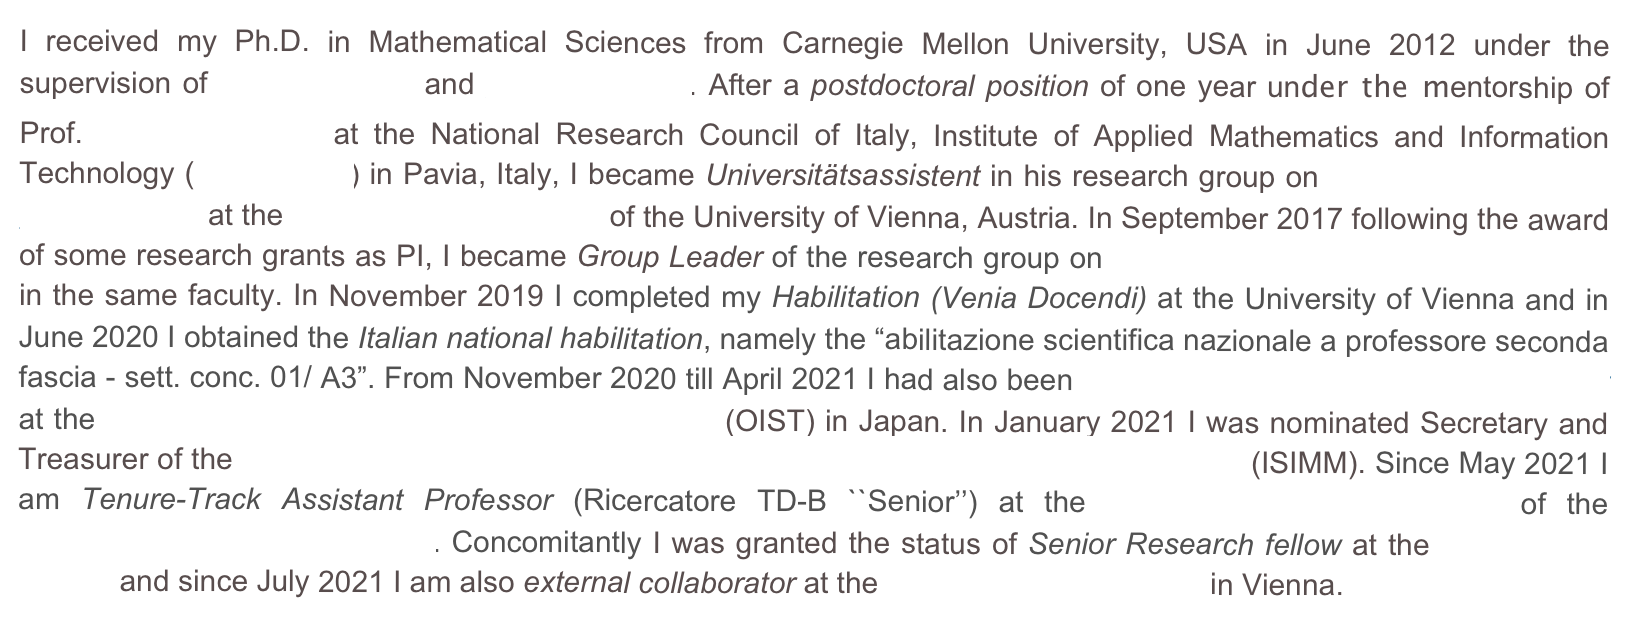 I received my Ph.D. in Mathematical Sciences from Carnegie Mellon University, USA in June 2012 under the supervision of Irene Fonseca and Giovanni Leoni. After a postdoctoral position of one year under the mentorship of Prof. Ulisse Stefanelli at the National Research Council of Italy, Institute of Applied Mathematics and Information Technology (CNR-IMATI) in Pavia, Italy, I became Universitätsassistent in his research group on Applied Mathematics and Modeling at the Faculty of Mathematics of the University of Vienna, Austria. In September 2017 following the award of some research grants as PI, I became Group Leader of the research group on Variational Methods and Applications in the same faculty. In November 2019 I completed my Habilitation (Venia Docendi) at the University of Vienna and in June 2020 I obtained the Italian national habilitation, namely the “abilitazione scientifica nazionale a professore seconda fascia - sett. conc. 01/ A3”. From November 2020 till April 2021 I had also been Visiting Professor and Excellence Chair at the Okinawa Institute of Science and Technology (OIST) in Japan. In January 2021 I was nominated Secretary and Treasurer of the The International Society for the Interaction of Mechanics and Mathematics (ISIMM). Since May 2021 I am Tenure-Track Assistant Professor (Ricercatore TD-B ``Senior’’) at the Department of Mathematics of the Polytechnic University of Milan. Concomitantly I was granted the status of Senior Research fellow at the University of Vienna and since July 2021 I am also external collaborator at the Wolfgang Pauli Institute in Vienna. 